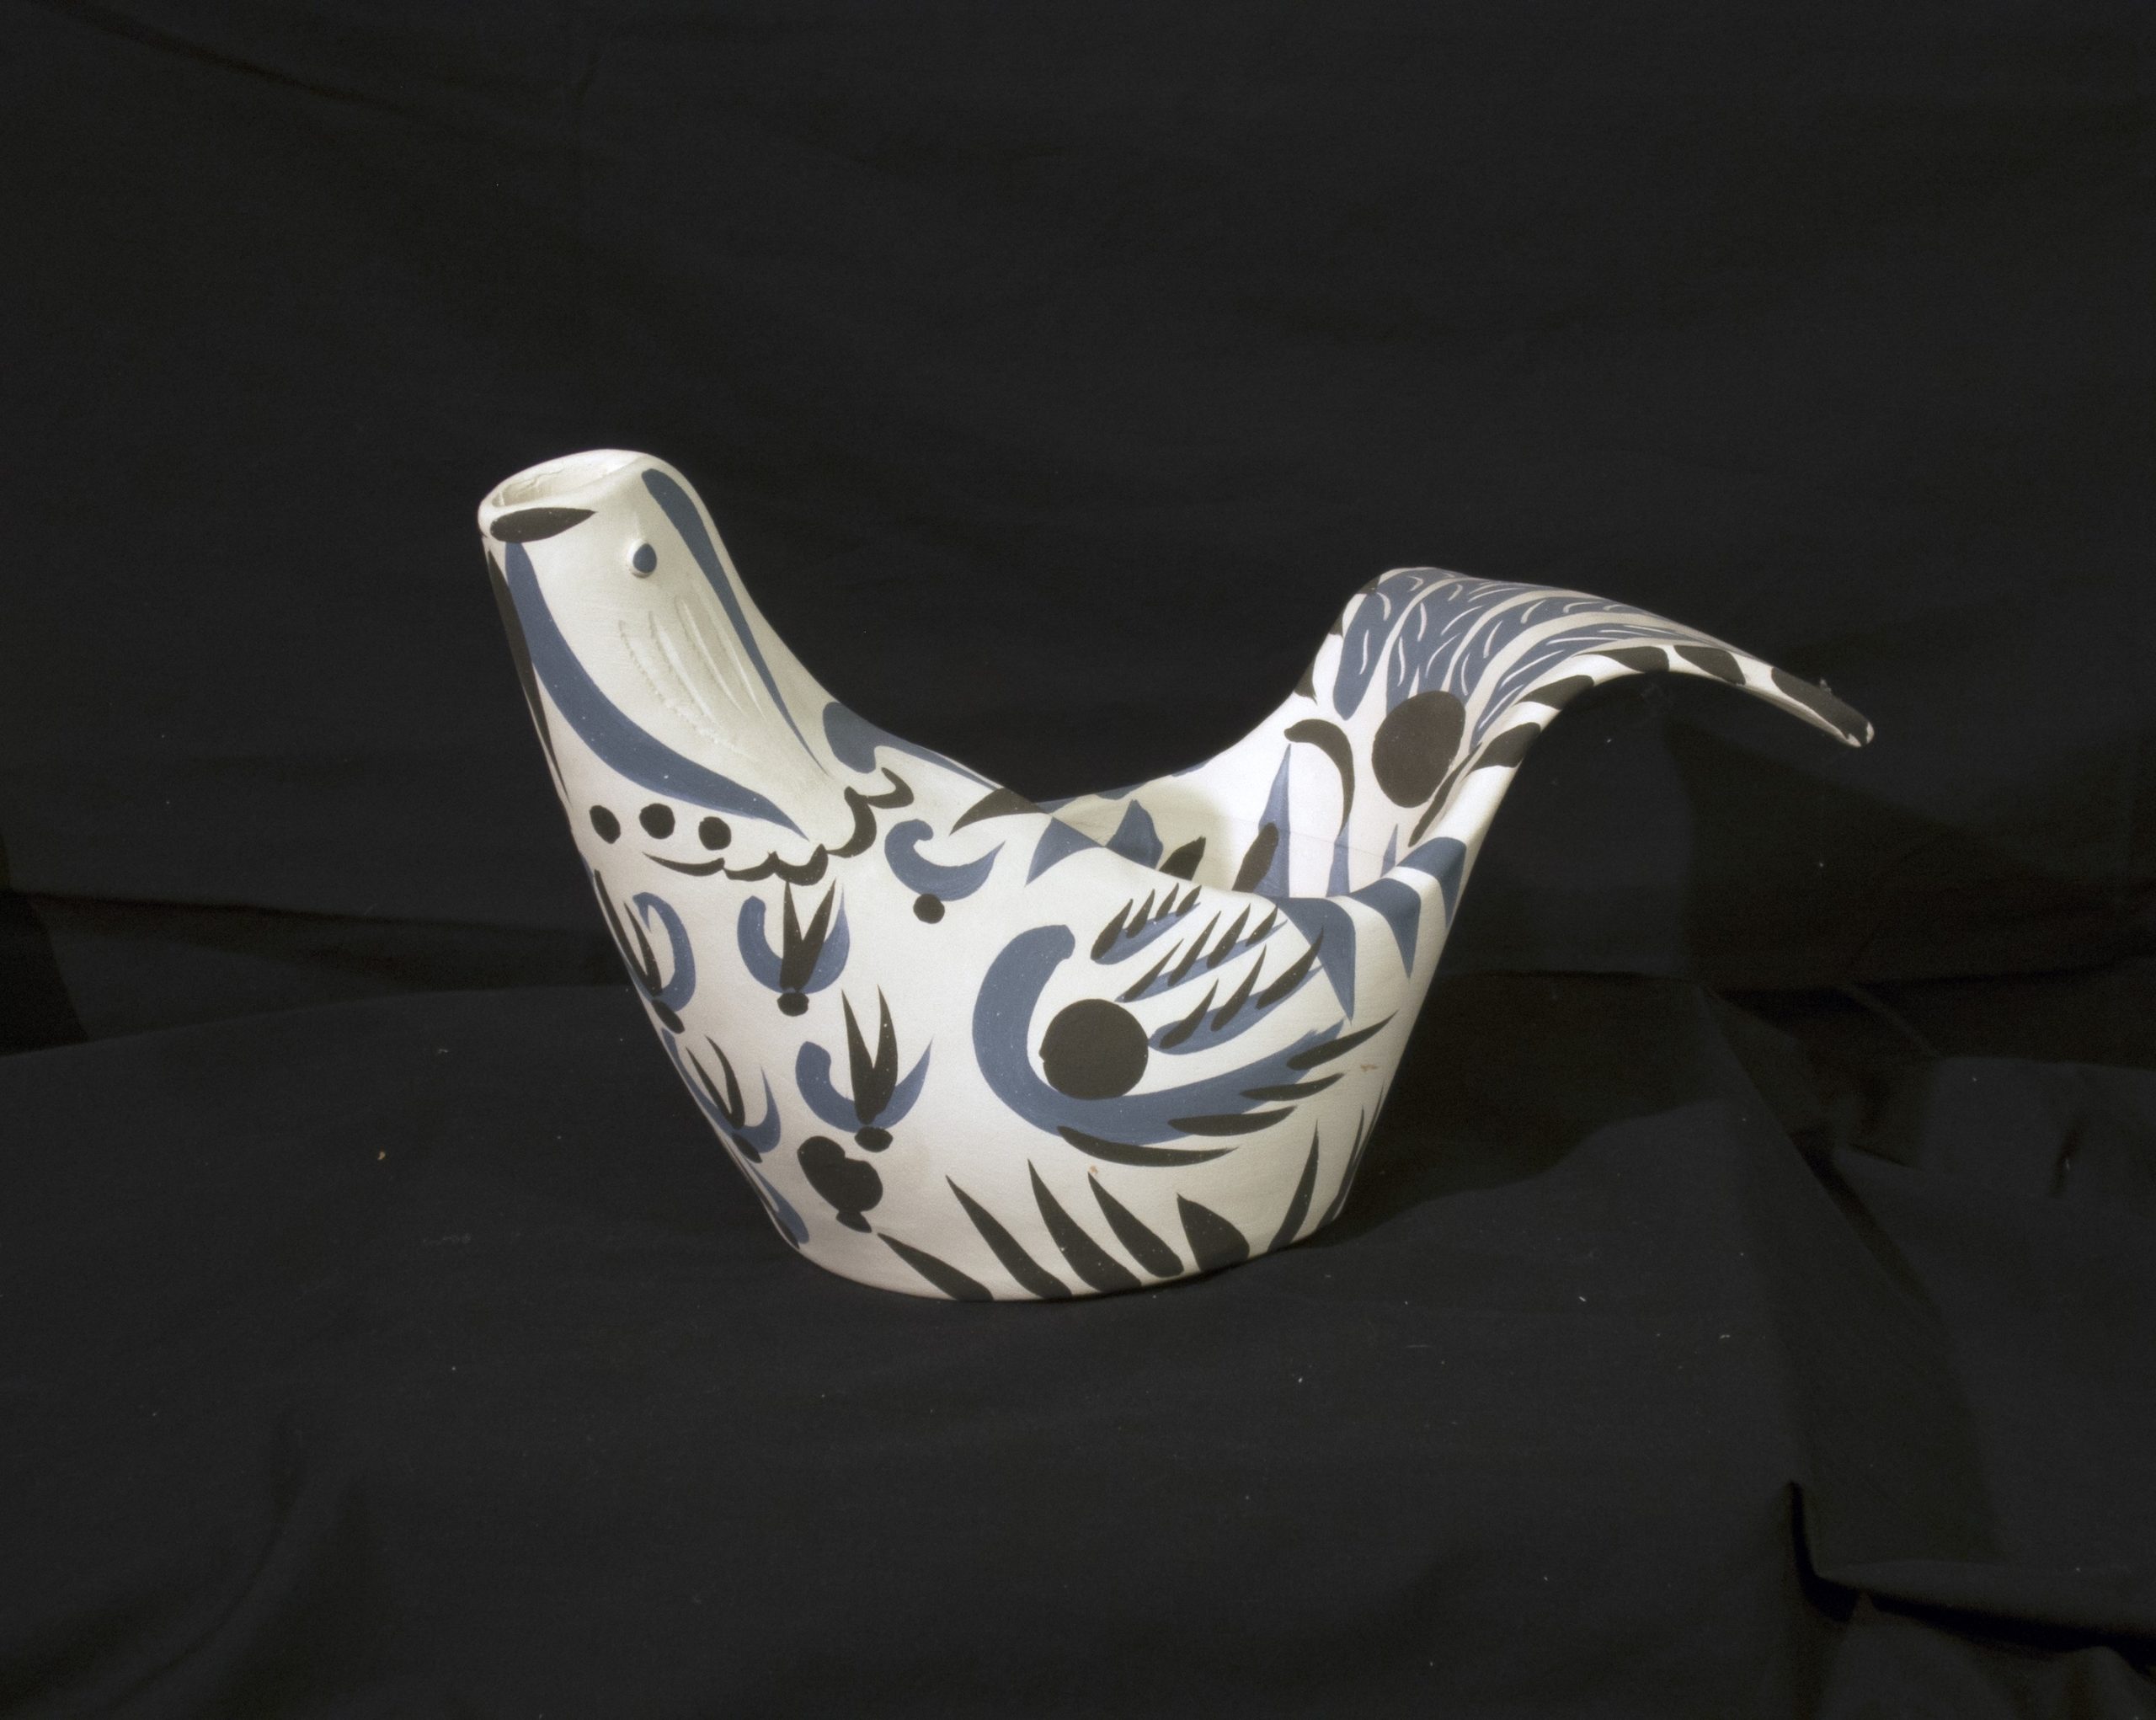 Pablo Picasso, Sujet colombe, mat (Dove), 1959, ceramic, 17.7 × 30 × 12.2 cm. Collection of Remai Modern. Gift of Frederick Mulder Foundation 2014. @ Picasso Estate / SOCAN (2022).